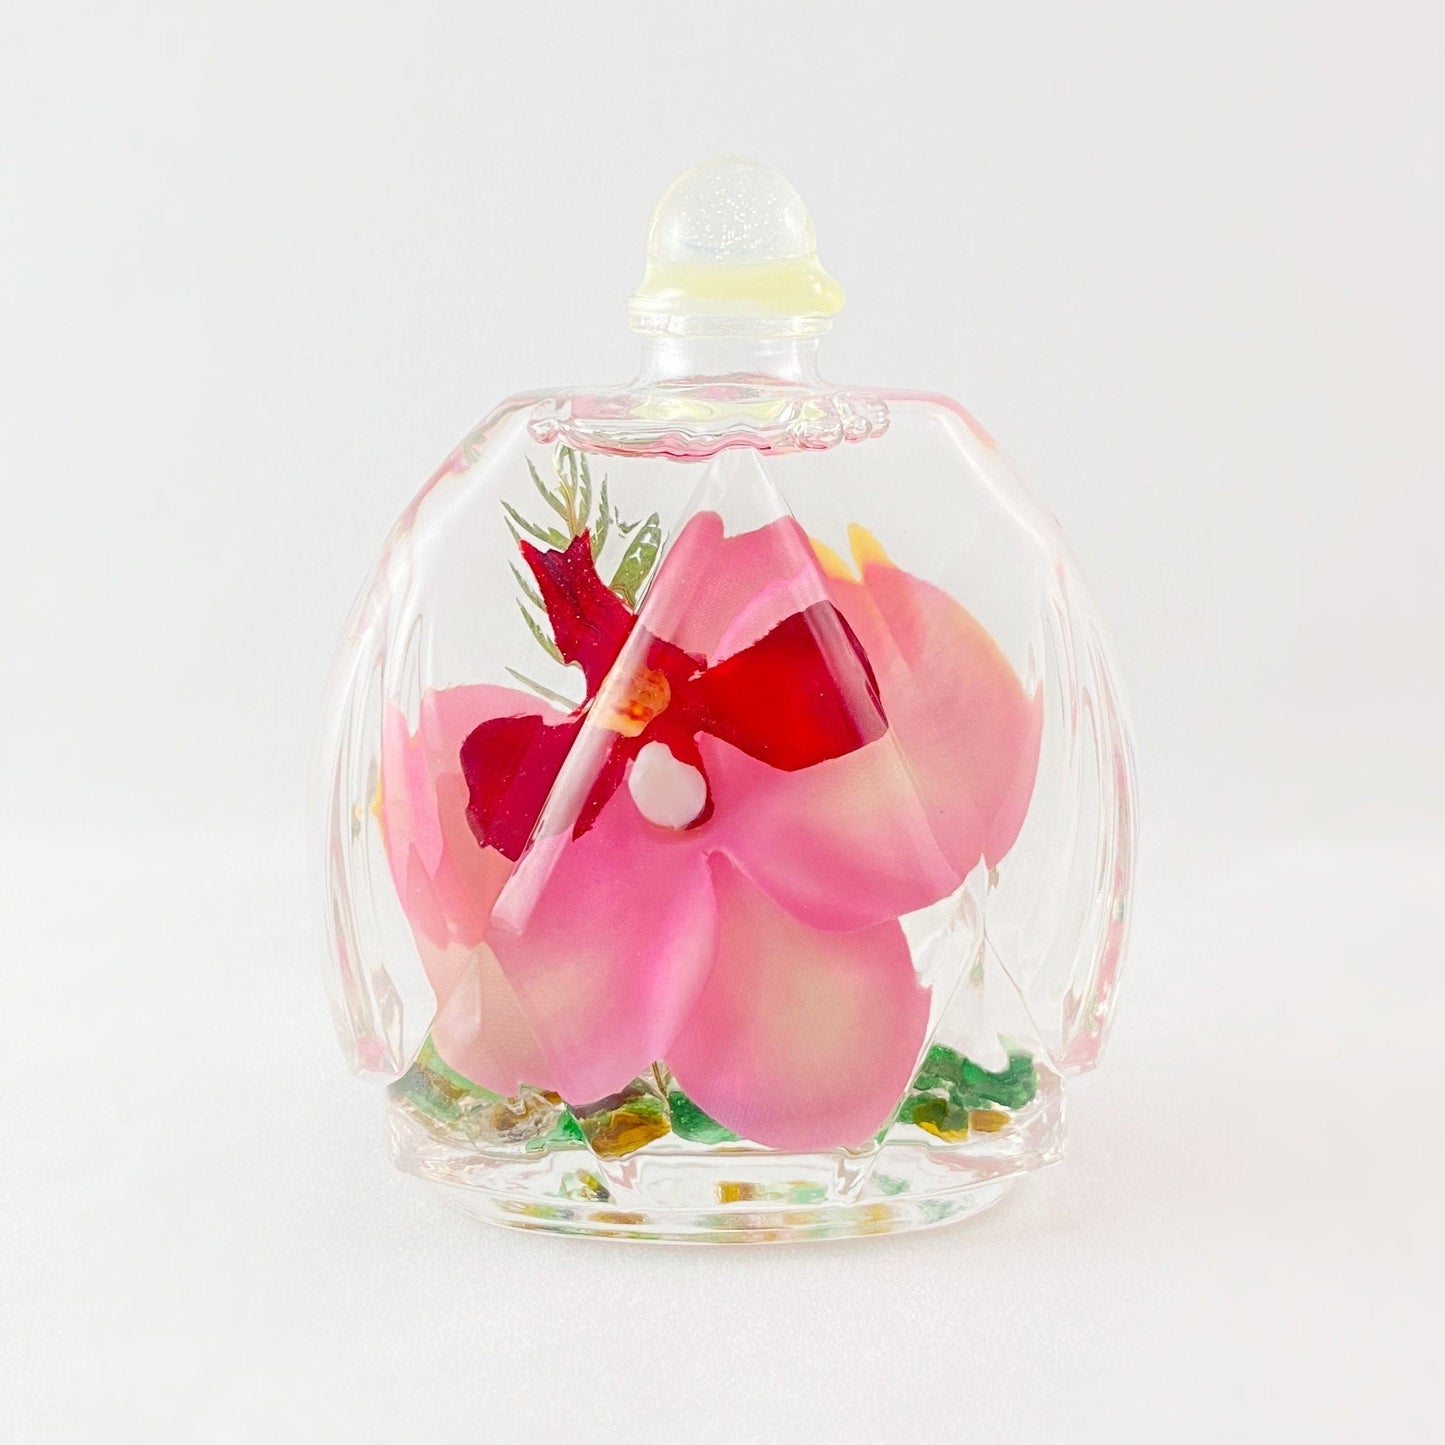 Liquid Candle with Pink Orchid, Small Round Liquid Candle/Home Decor - Handmade in USA - Long Burn Time